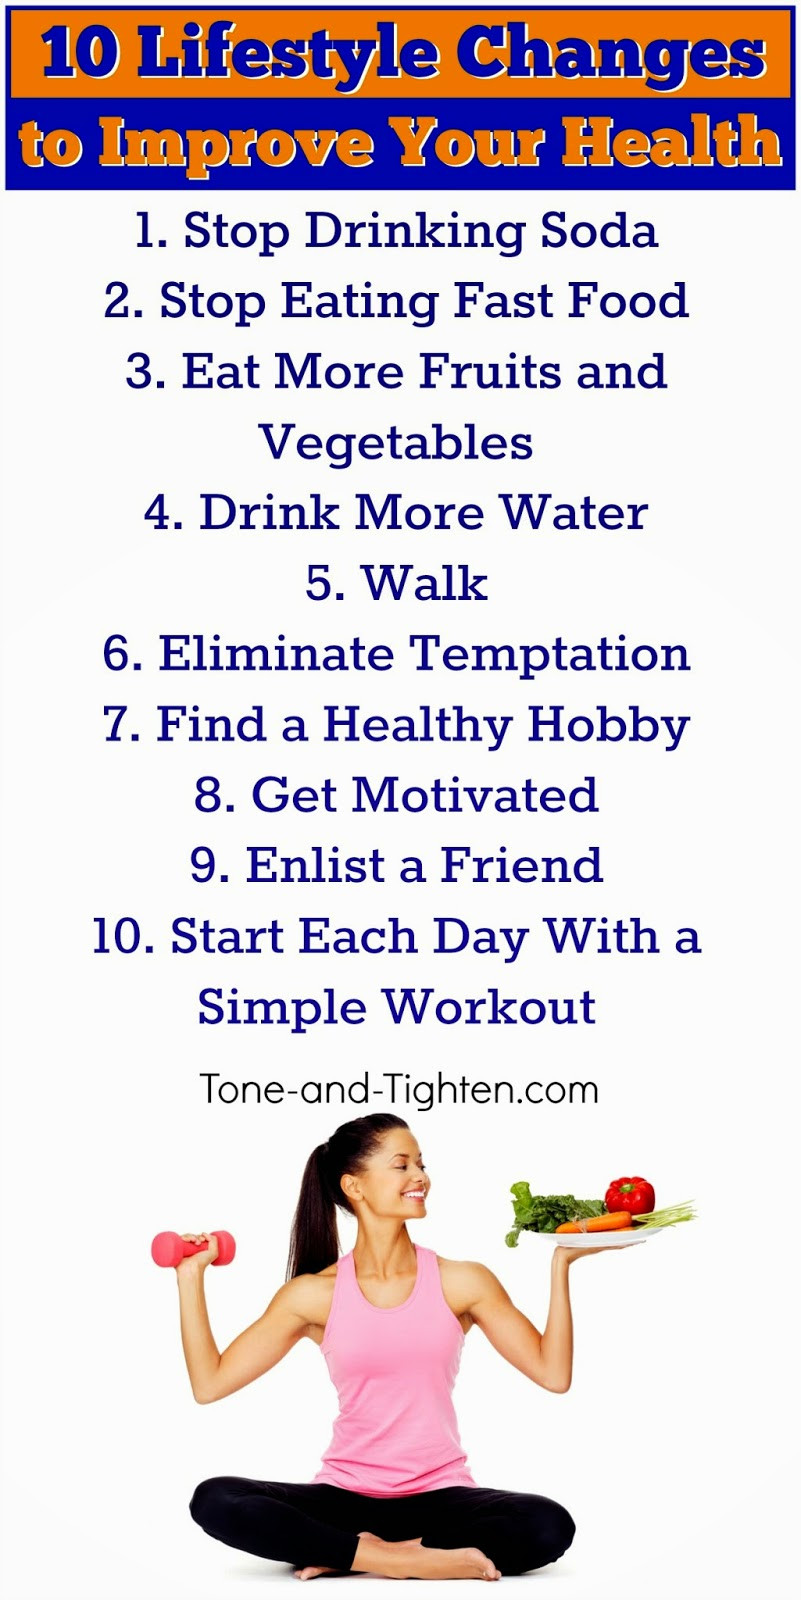 How To Lose Weight Healthy Way
 Tone & Tighten 10 easy lifestyle changes to help you